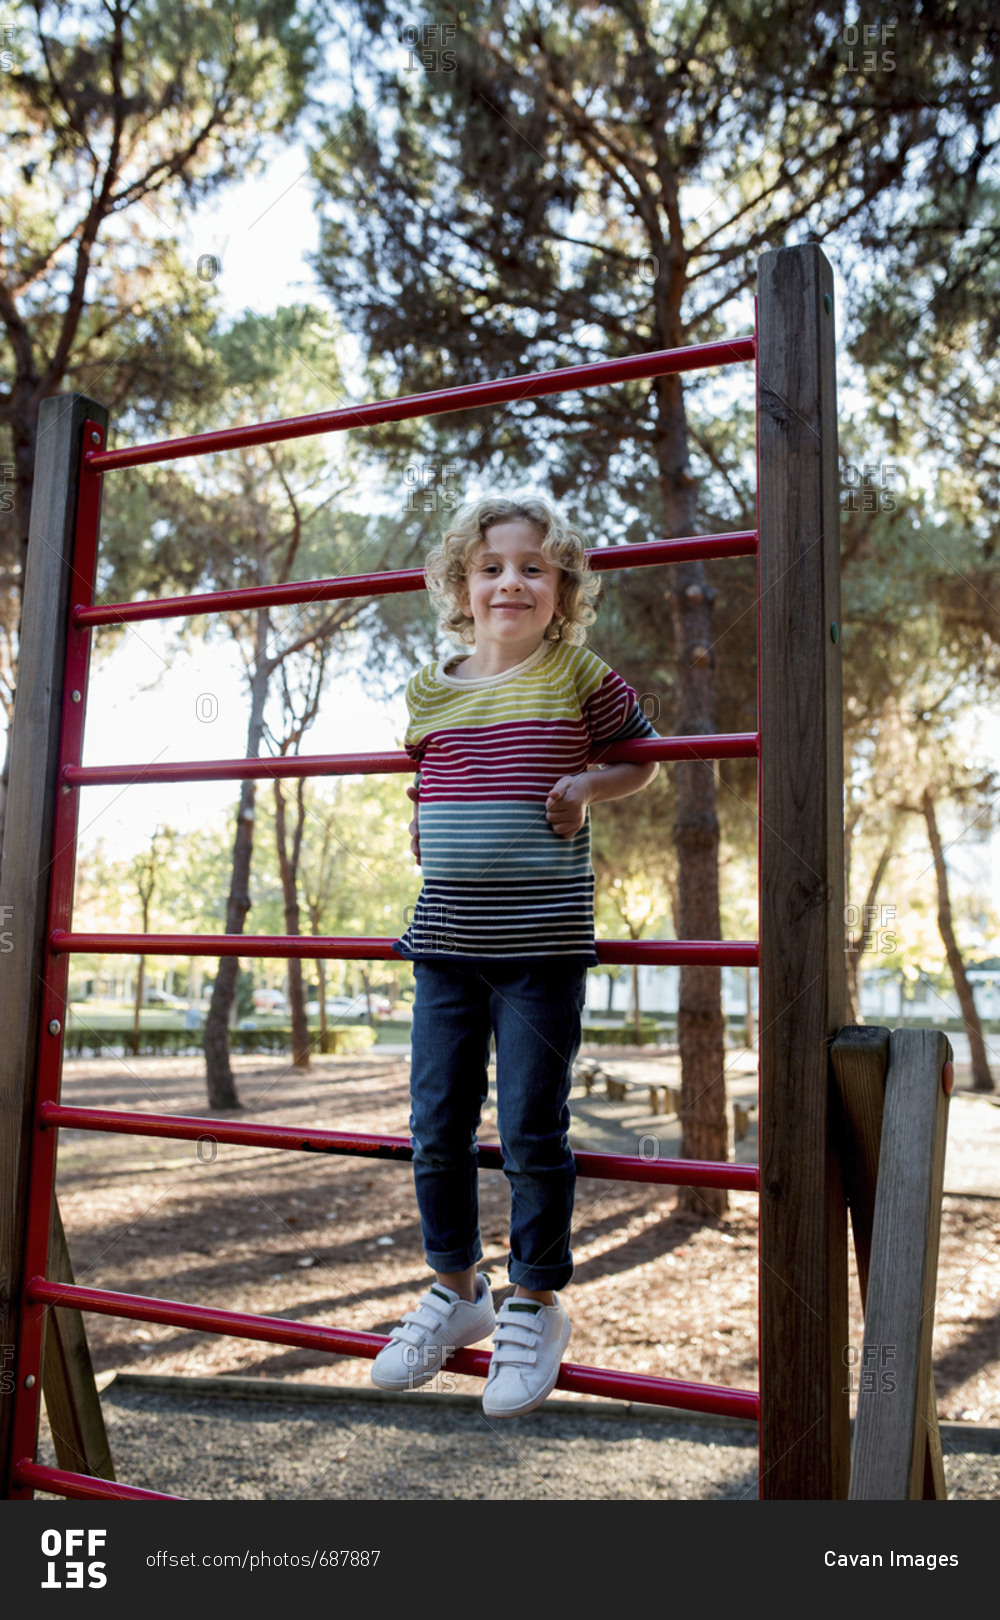 Portrait of girl standing on outdoor play equipment at park